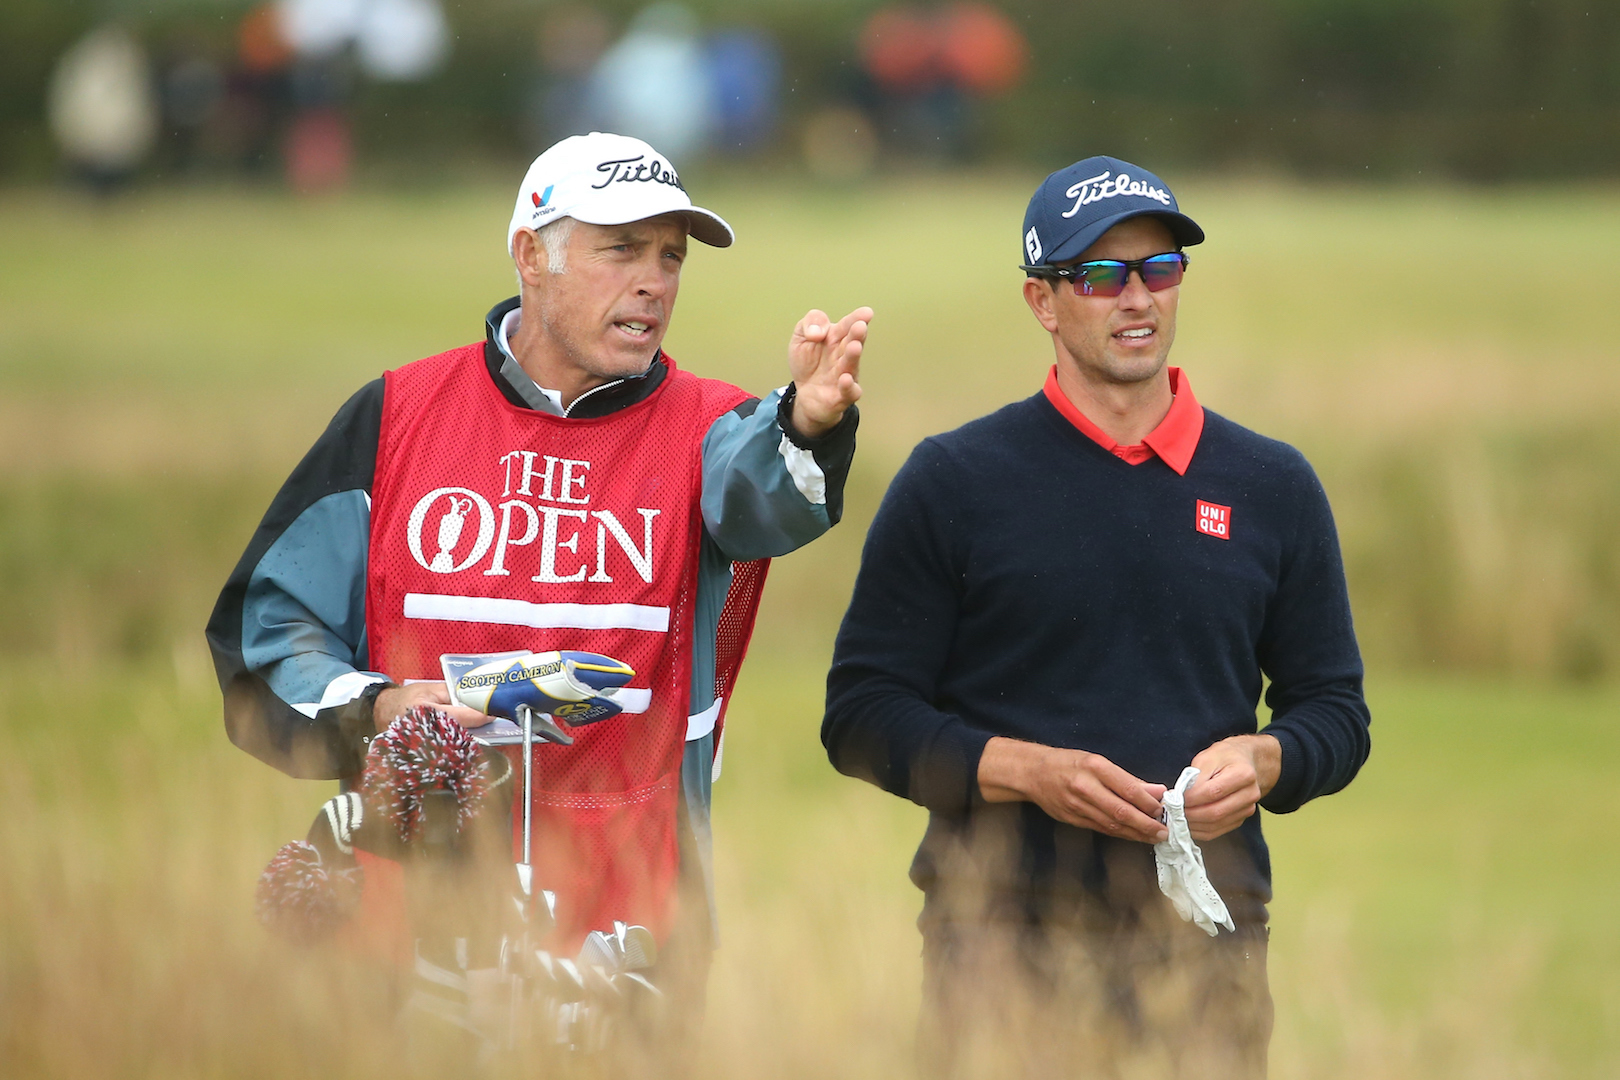 Steve Williams to caddy for Danielle Kang - GolfPunkHQ